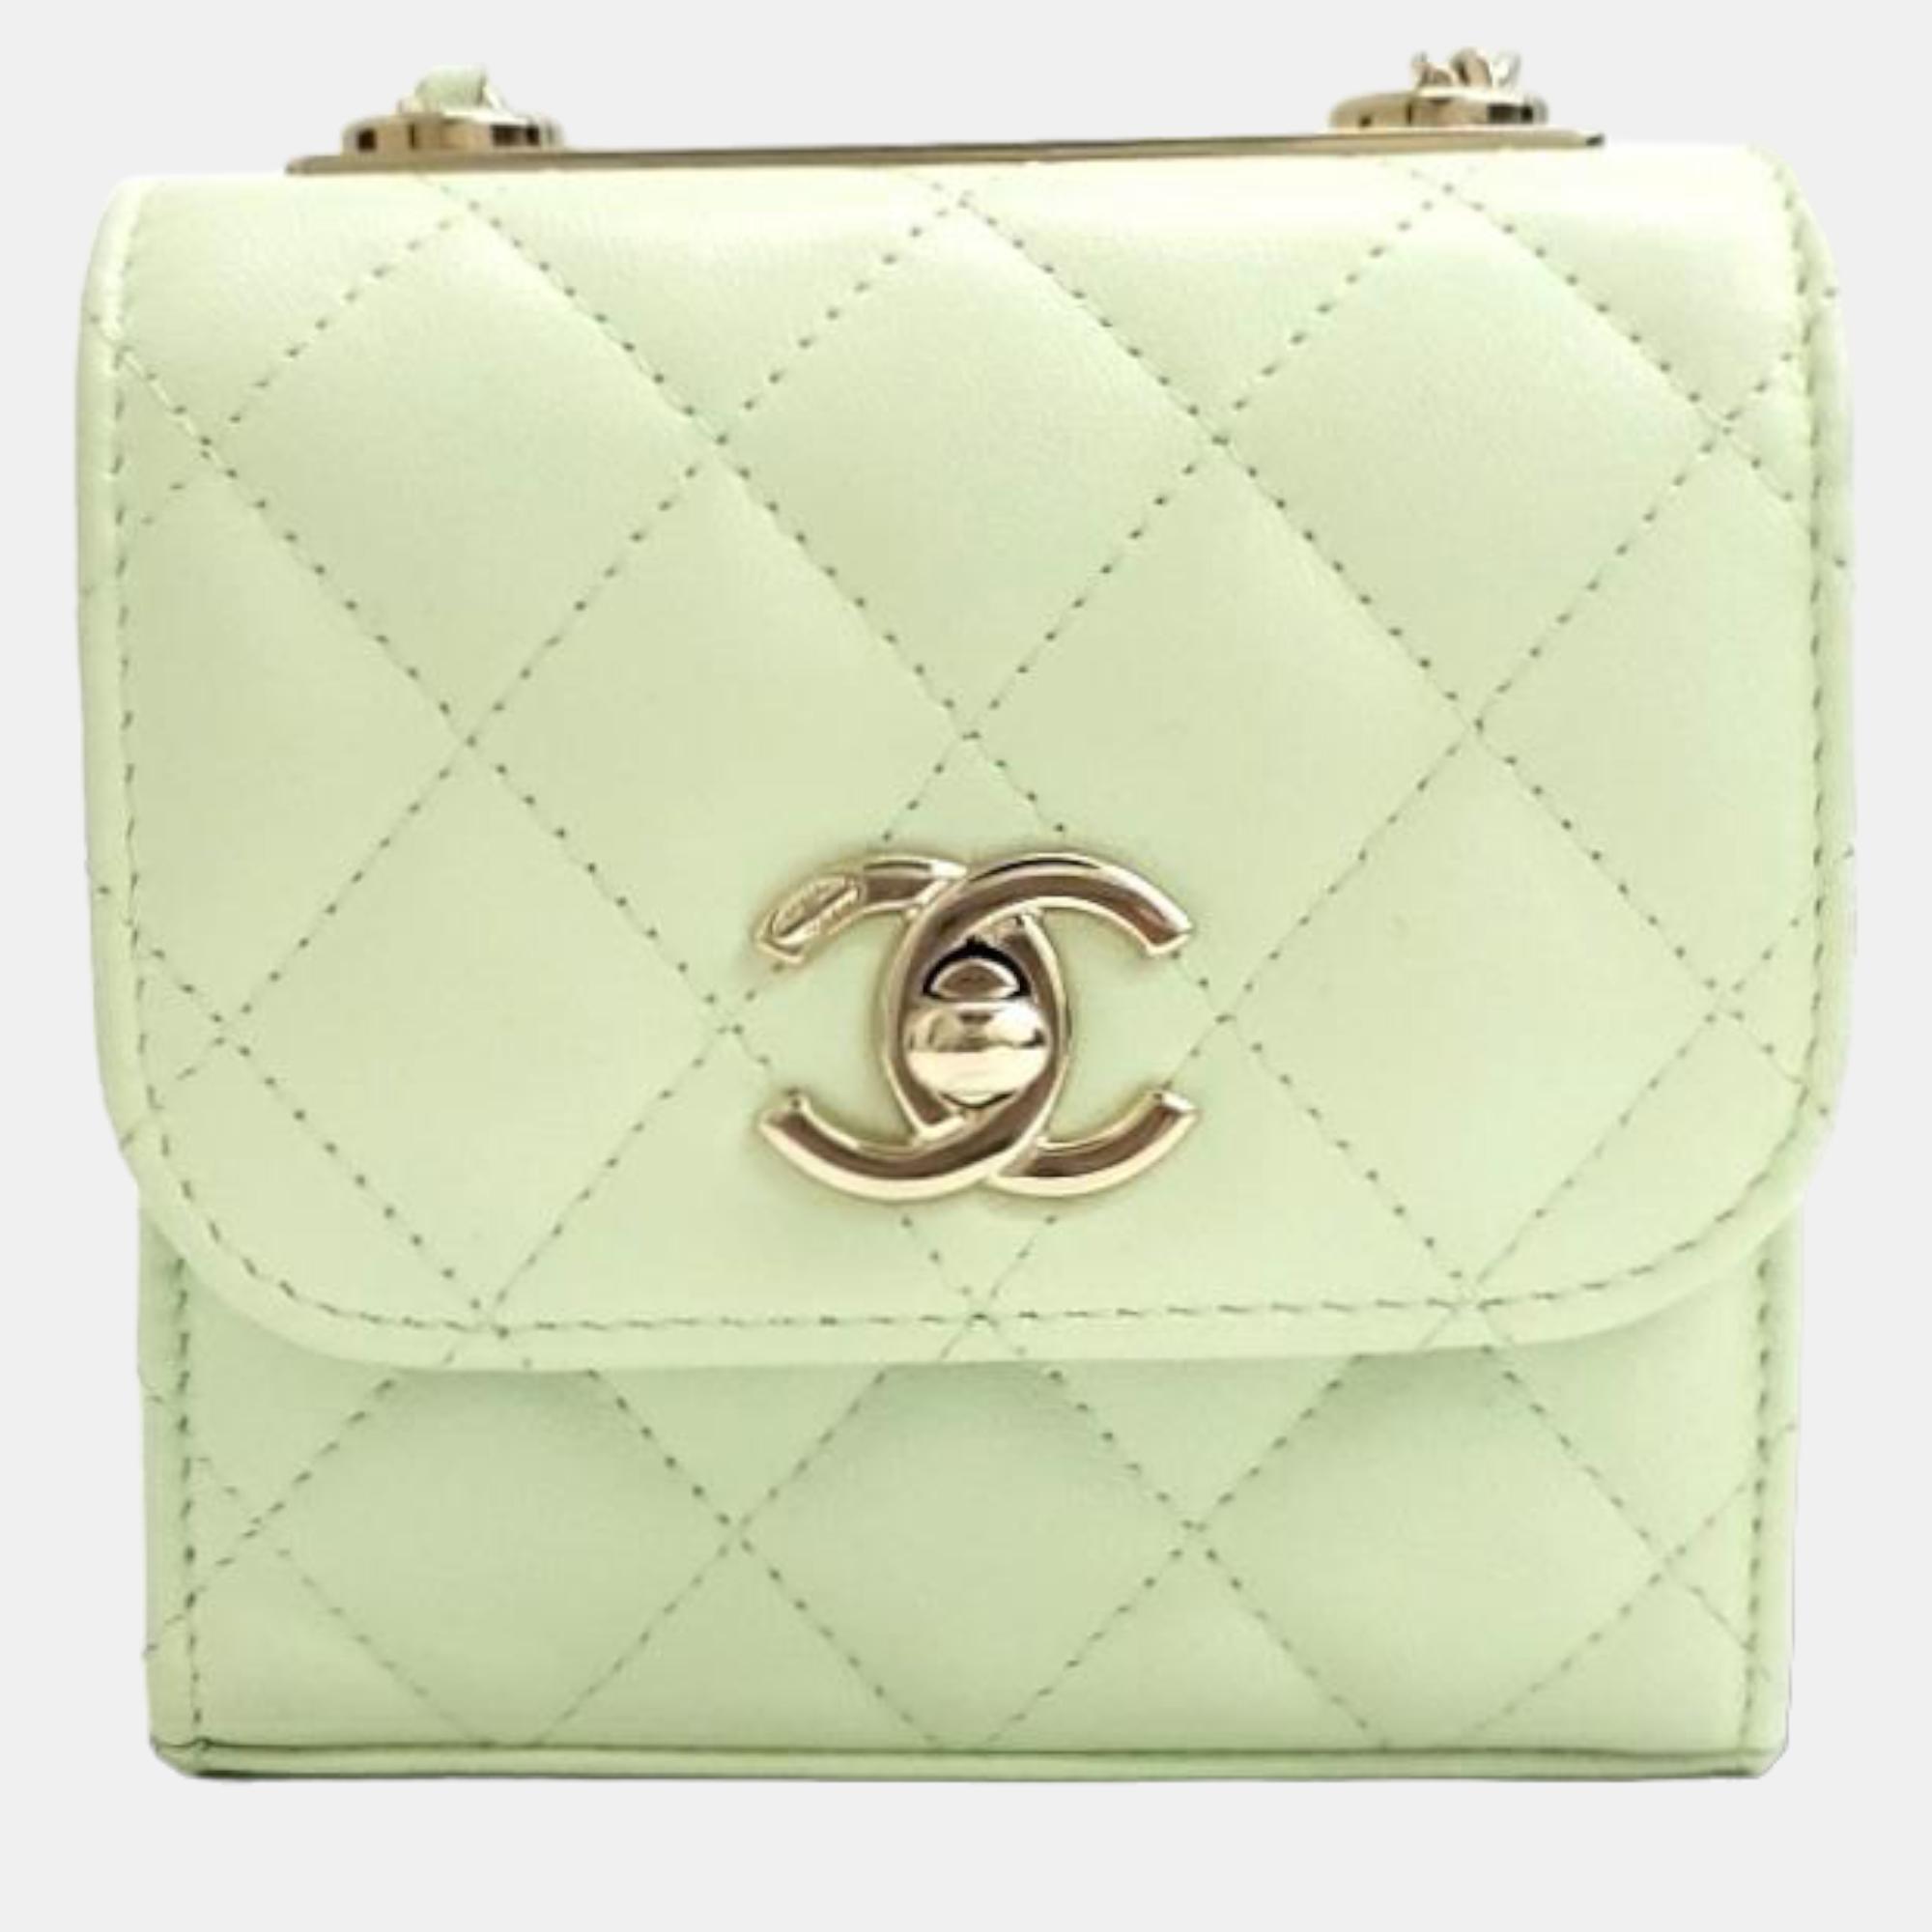 Pre-owned Chanel Green Lambskin Leather Mini Trendy Cc Clutch Bag